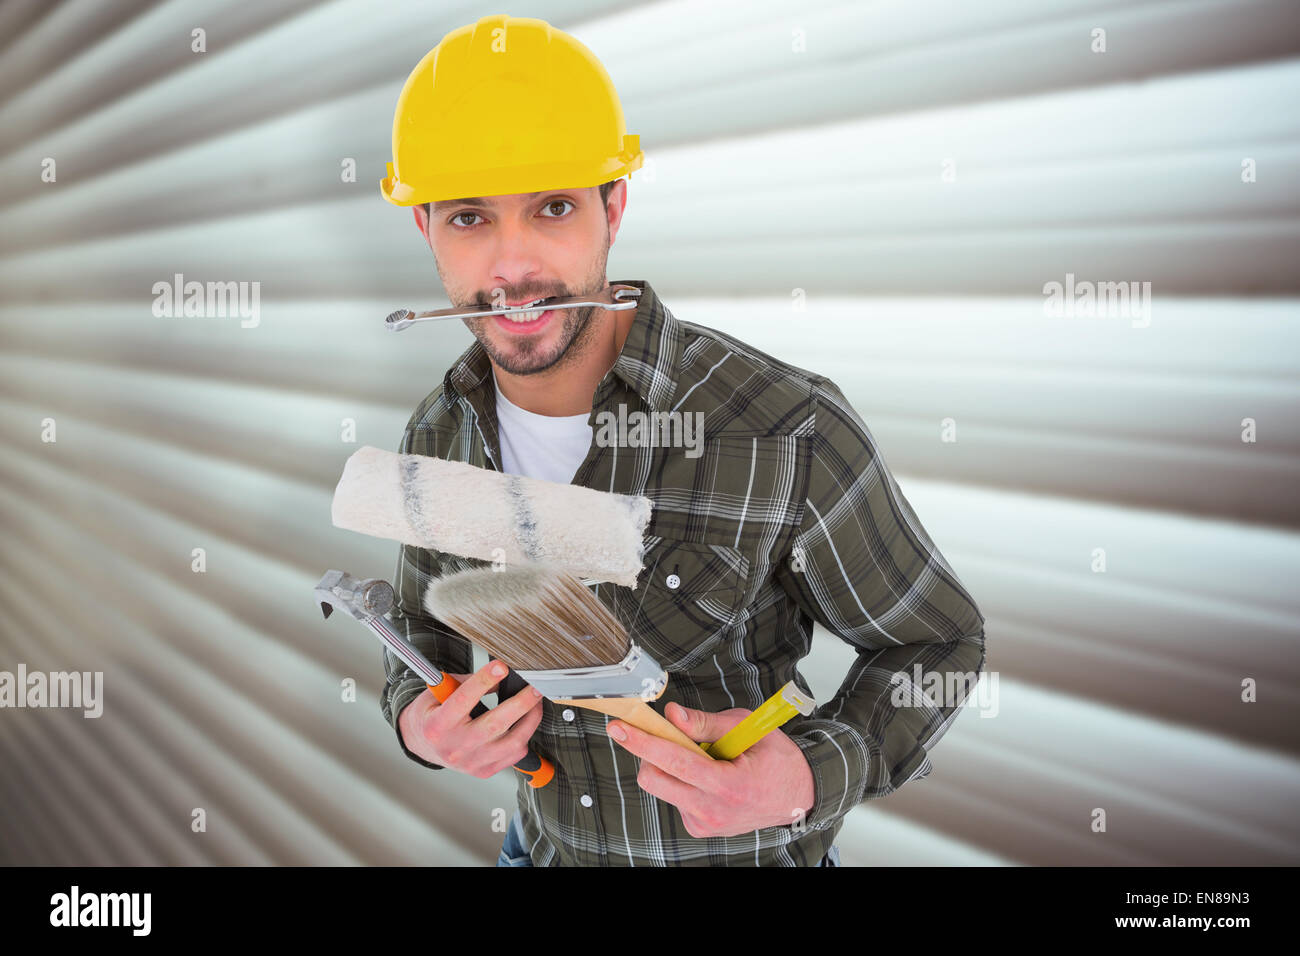 Composite image of manual worker holding various tools Stock Photo